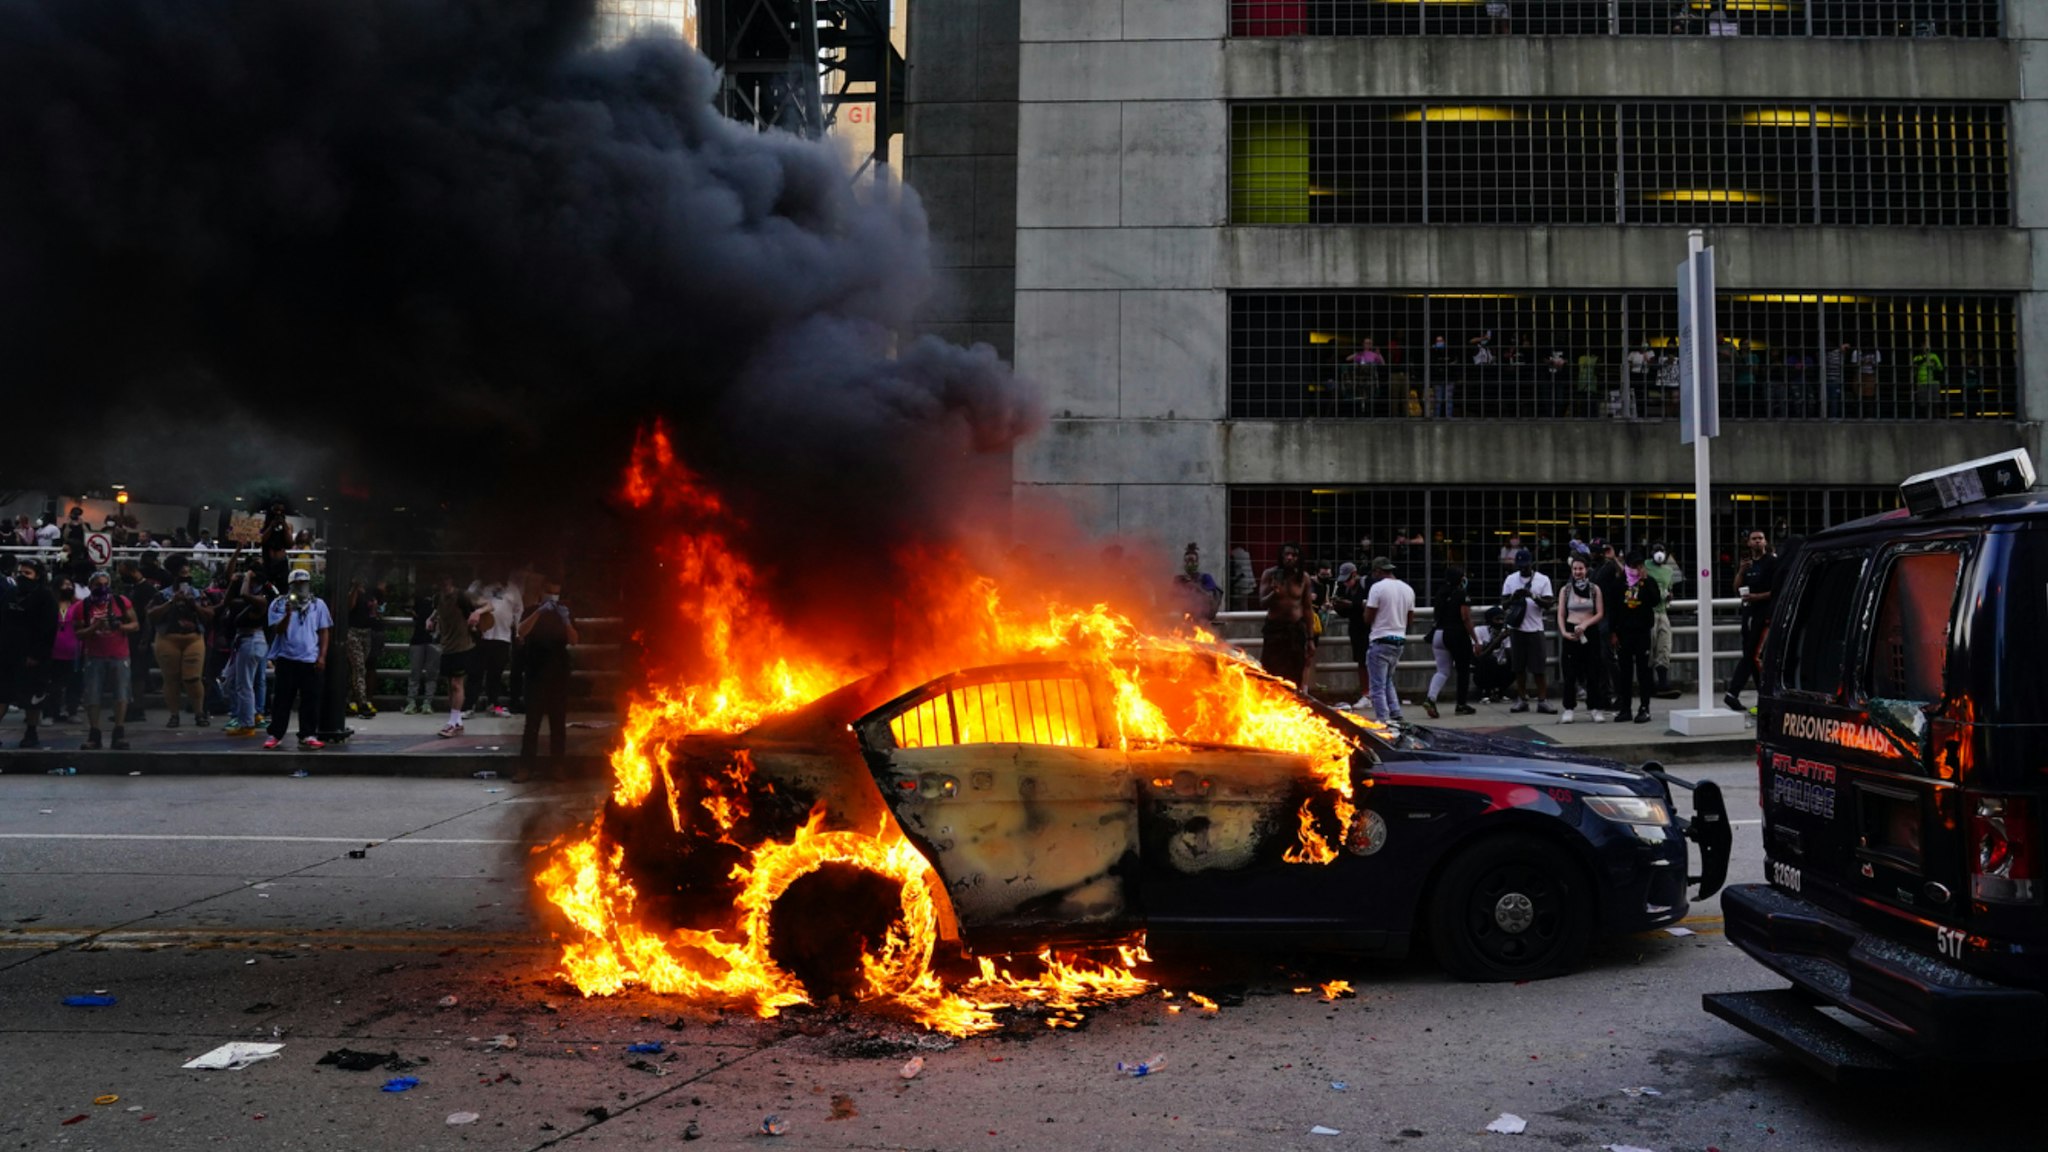 A burning police car is seen during a protest on May 29, 2020 in Atlanta, Georgia. Demonstrations are being held across the US after George Floyd died in police custody on May 25th in Minneapolis, Minnesota.